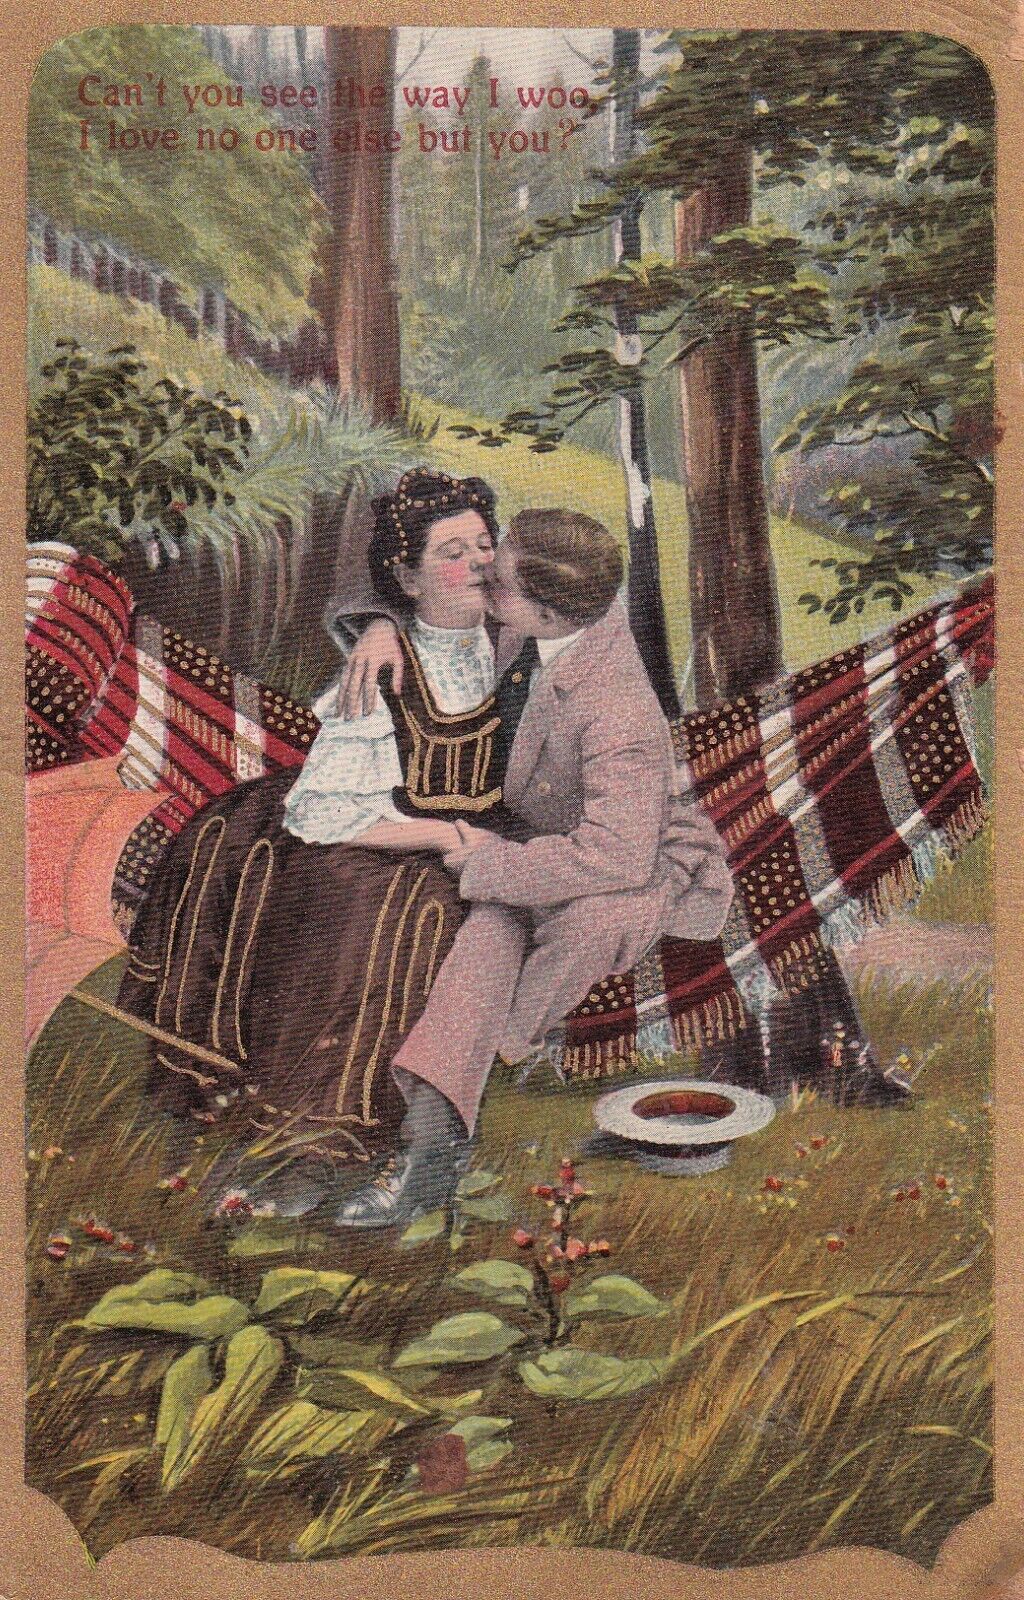 Vintage I Love No One But You Early 1900s Postcard Man & Woman Kissing Hammock